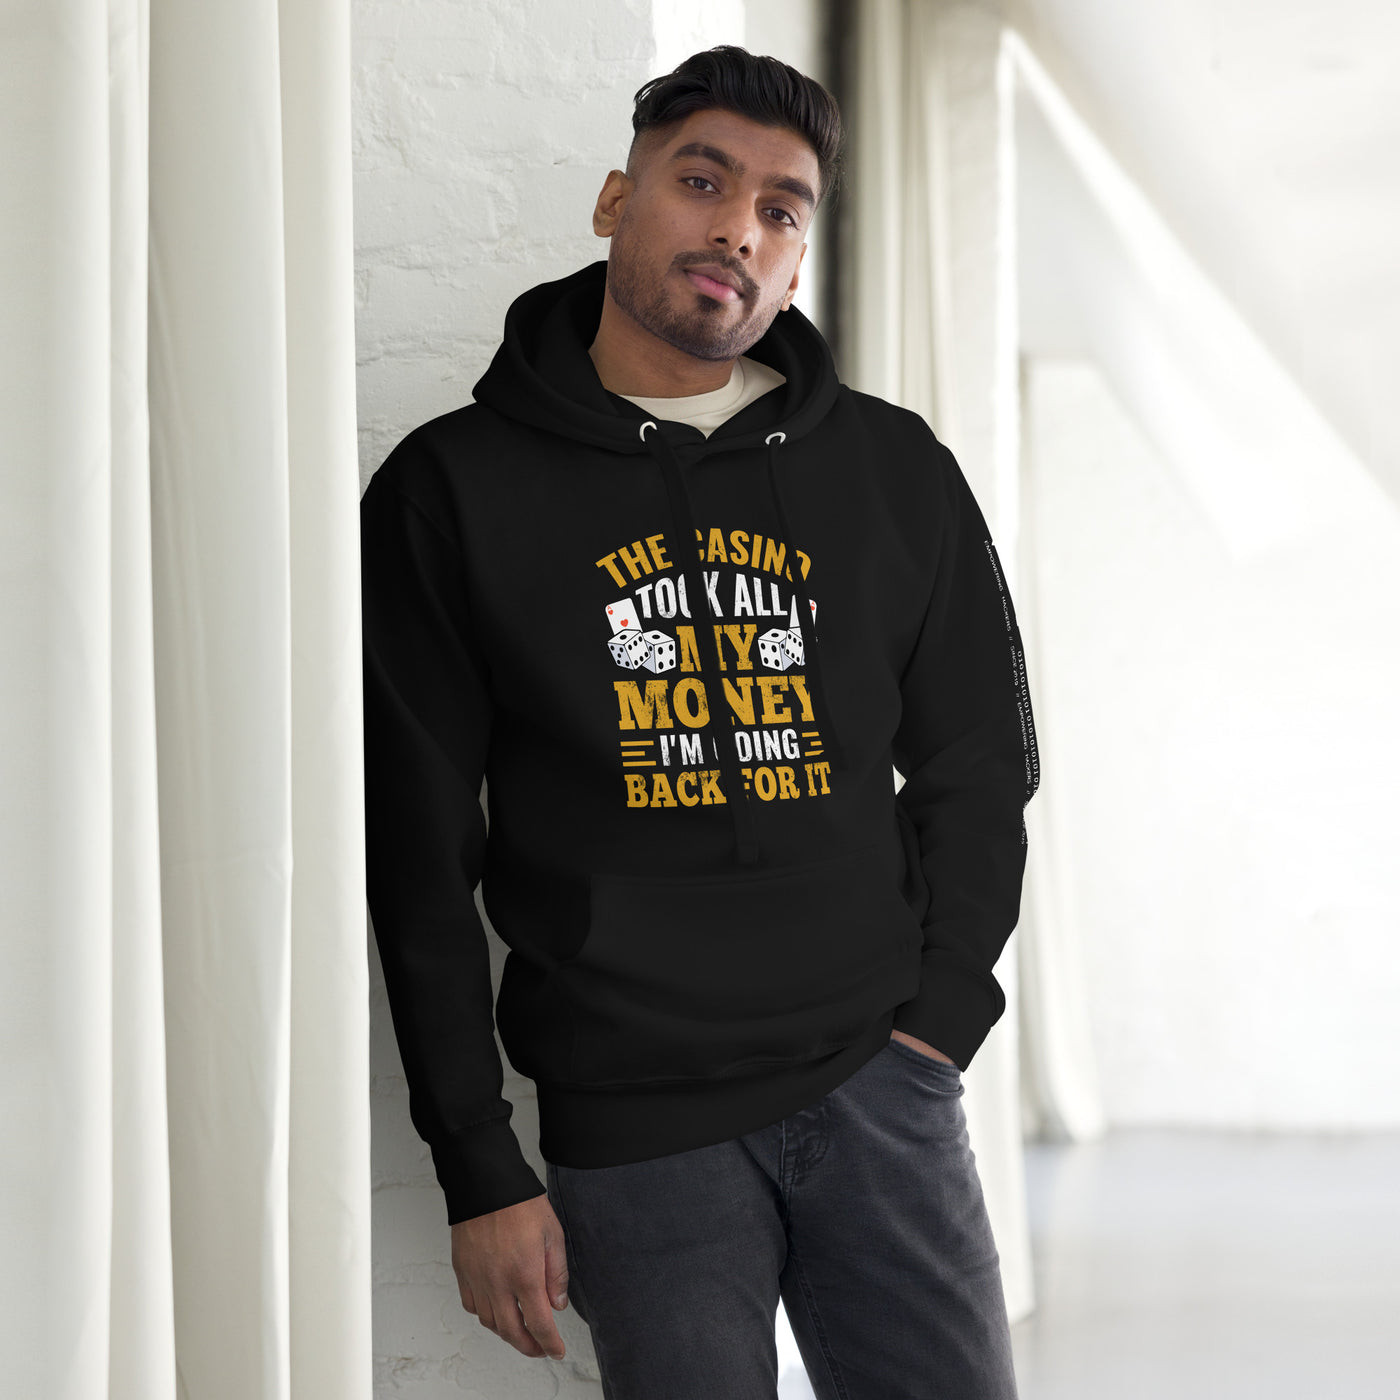 The Casino Took all my money, I am Going back for it - Unisex Hoodie